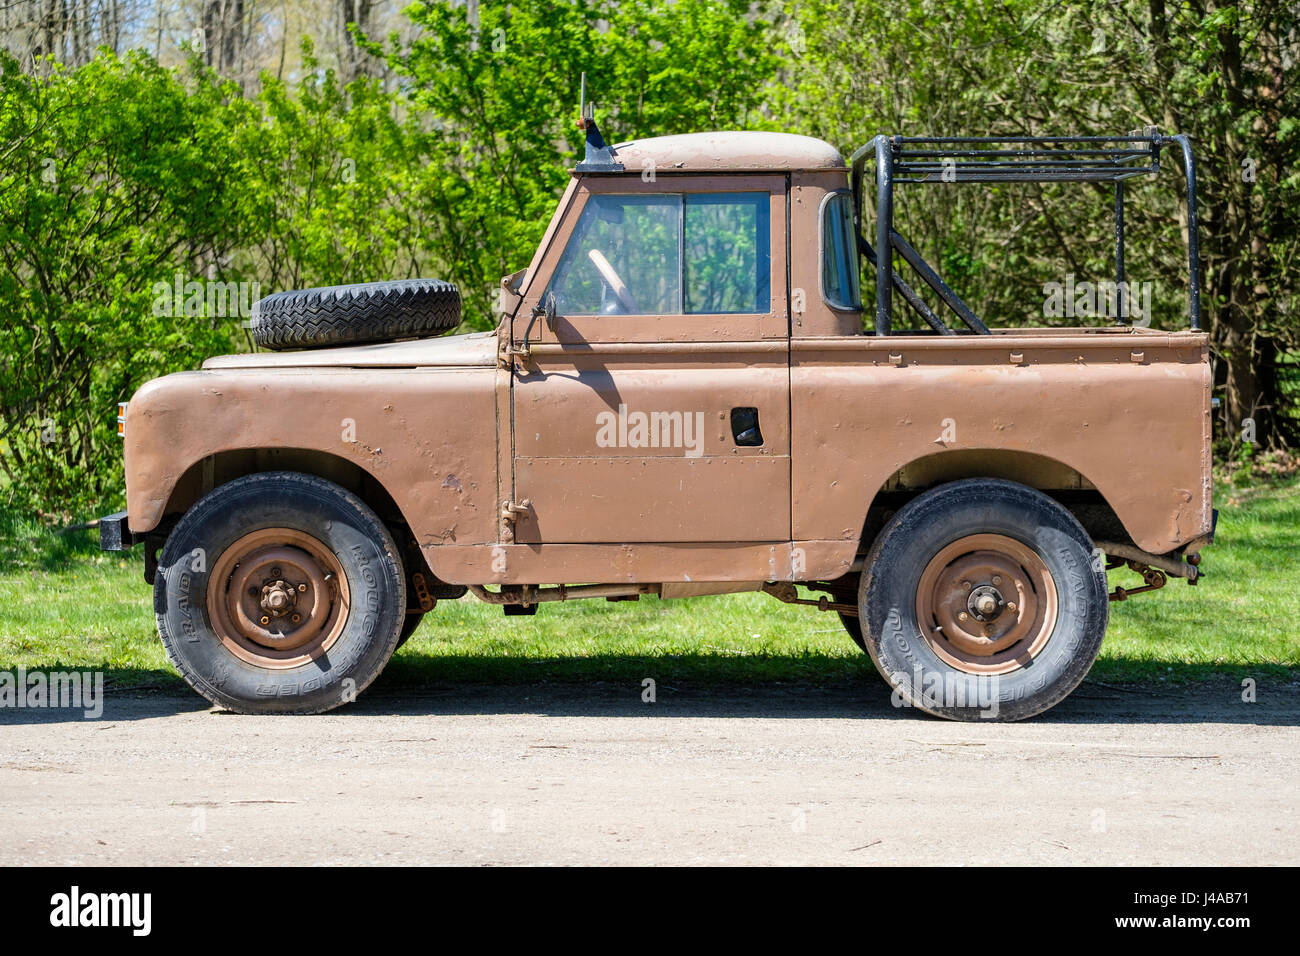 1963, old Land Rover Series IIa, Series 2a, Series 2, 88, pick-up truck, 4x4 all-terrain vehicle, modified, side view, lateral view, profile, 1960s Stock Photo